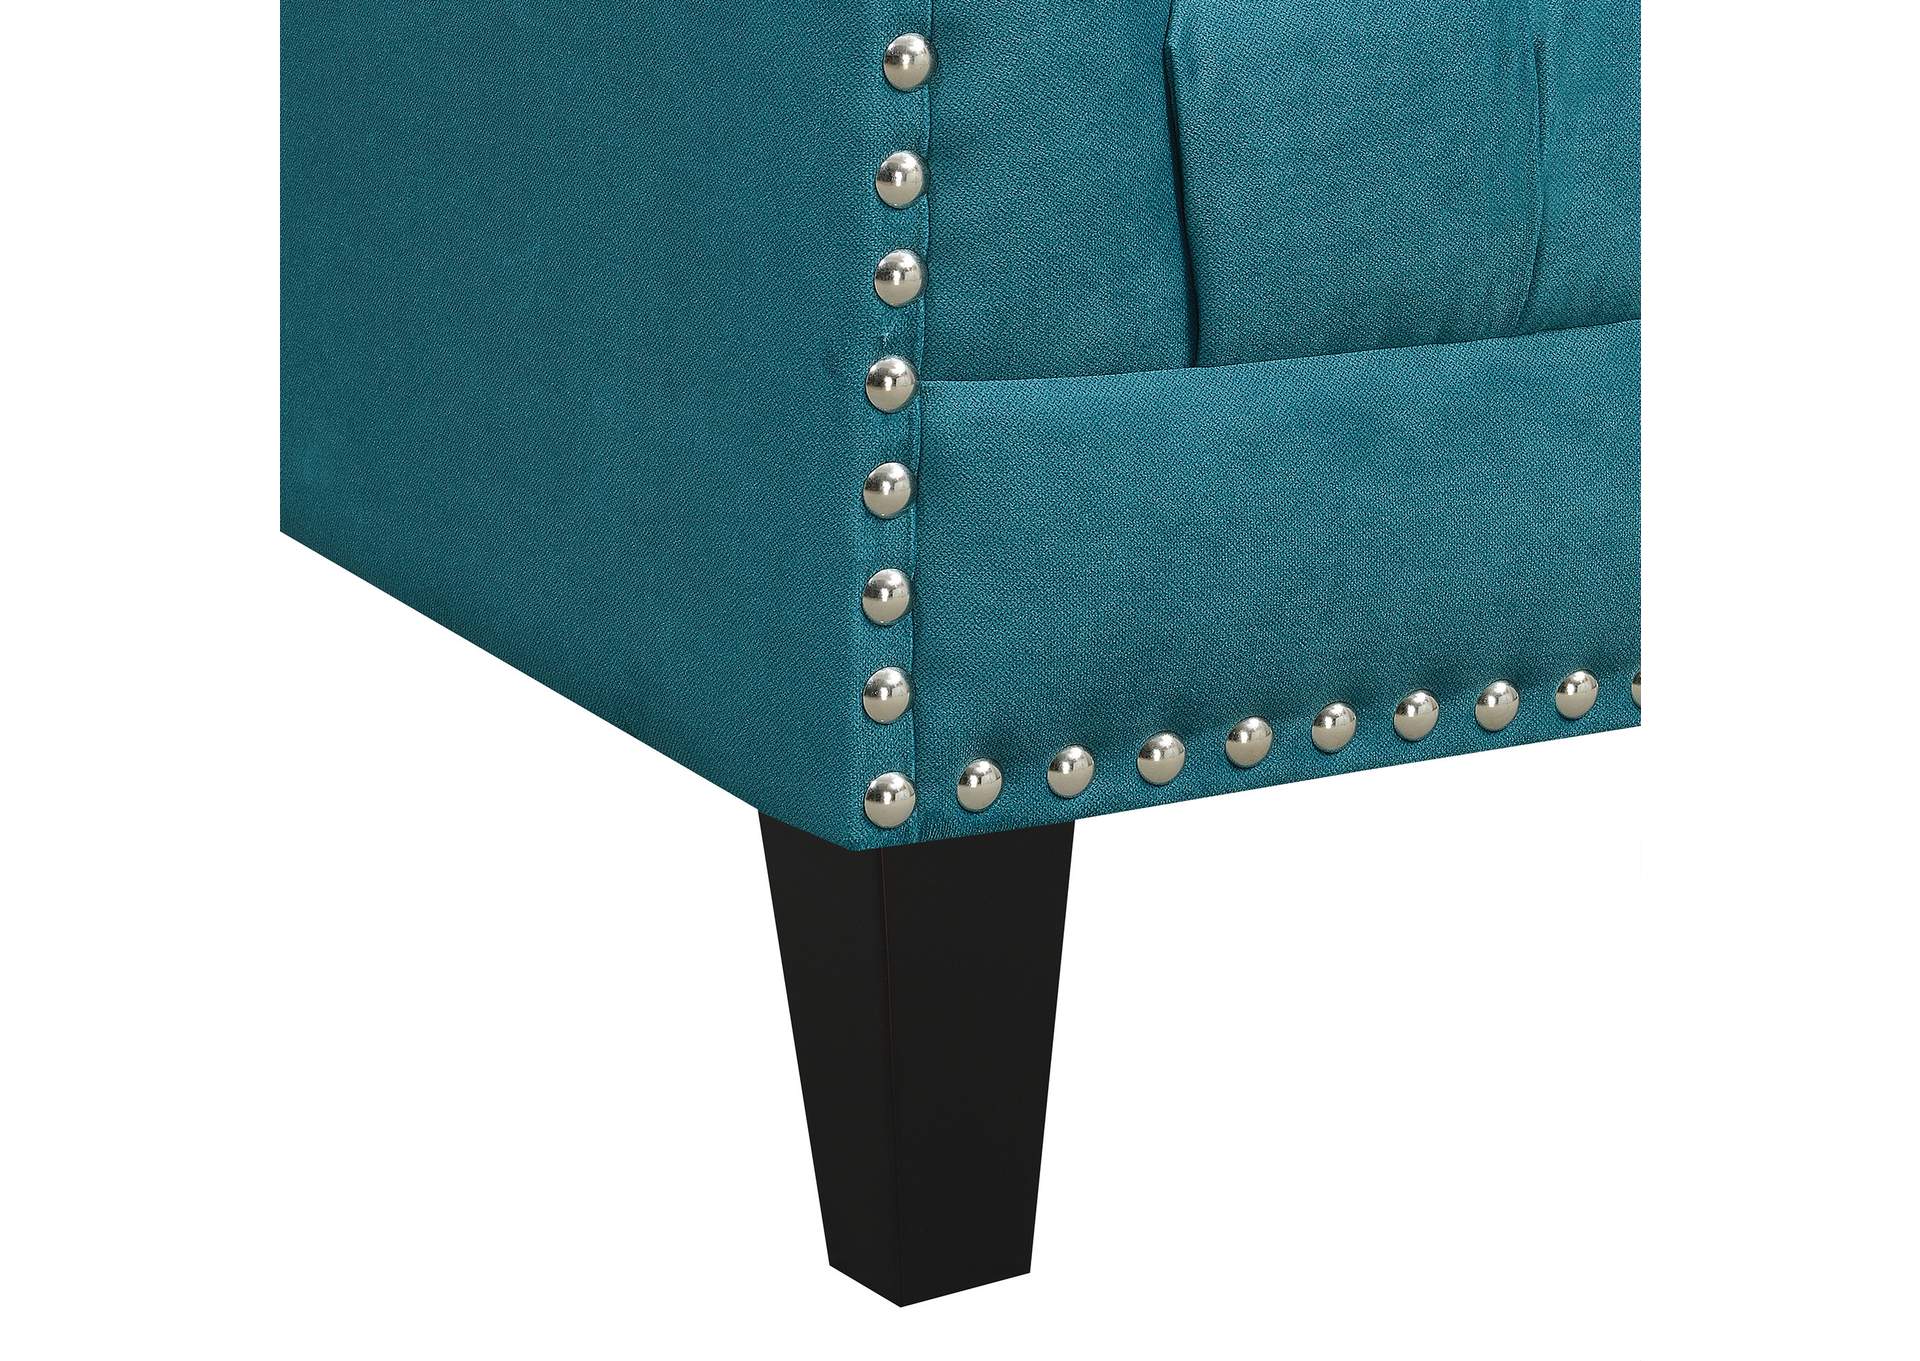 Norway Accent Chair Ottoman Teal,Elements